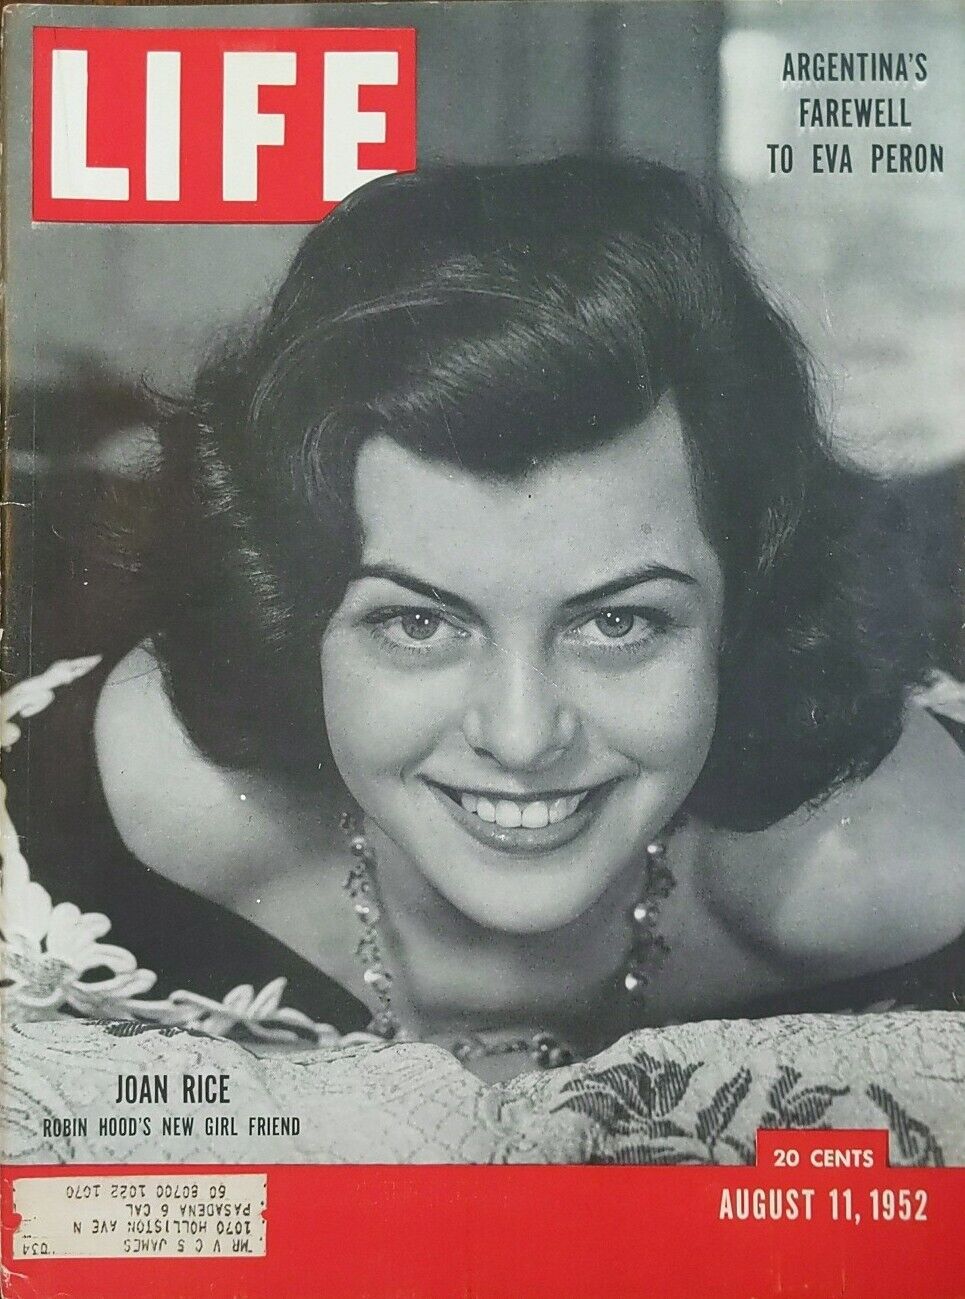 August 11, 1952 Joan Rice Life Magazine **COVER SHEET ONLY**